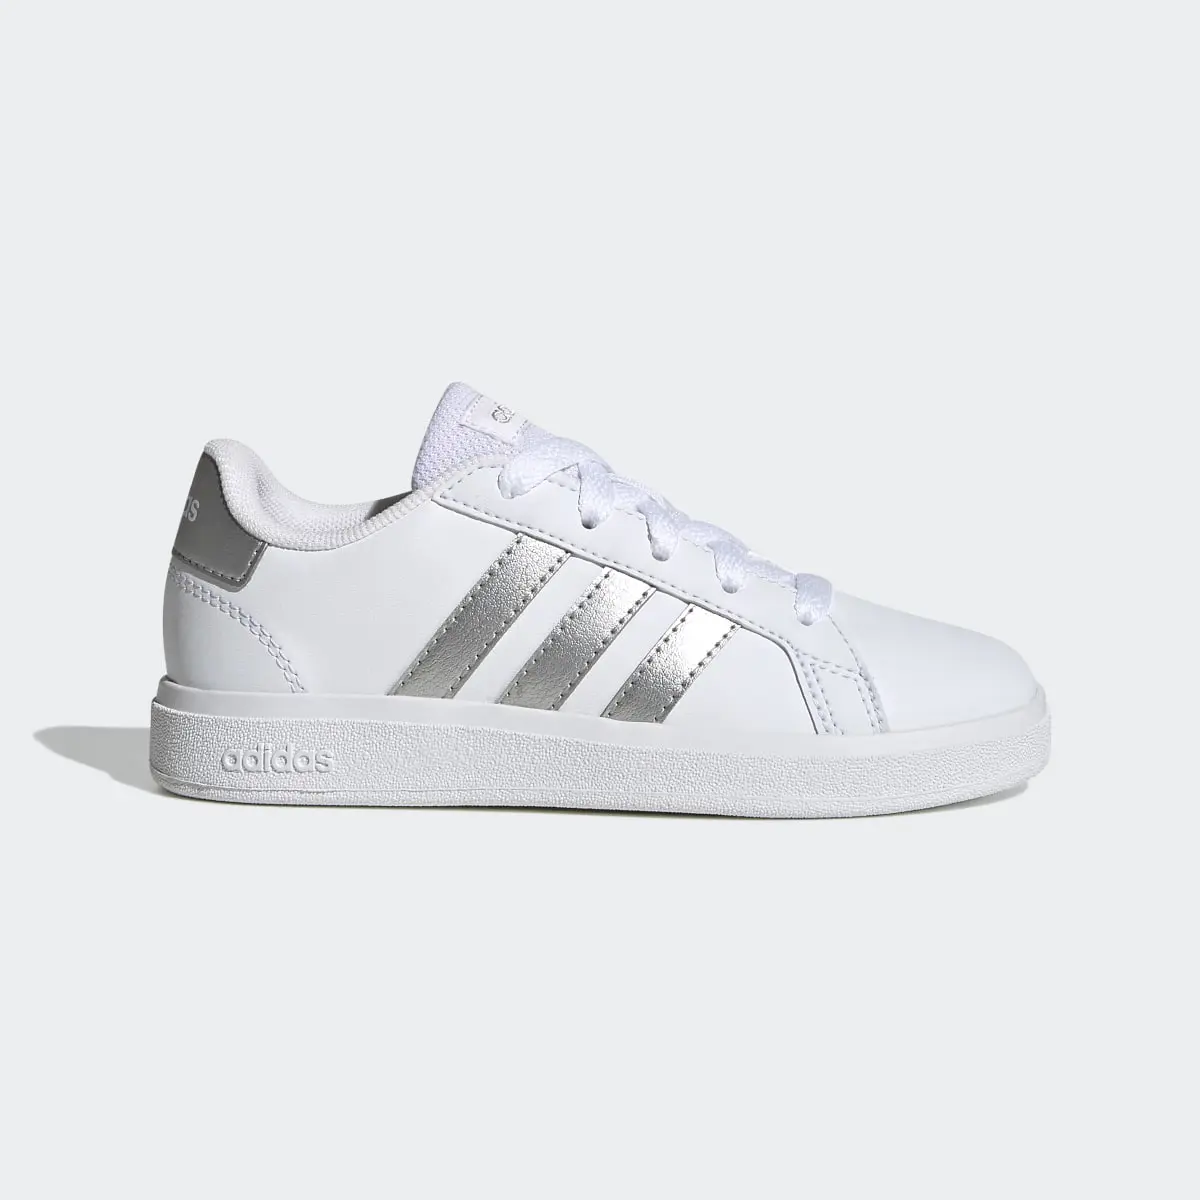 Adidas Chaussure Grand Court Lifestyle Tennis Lace-Up. 2